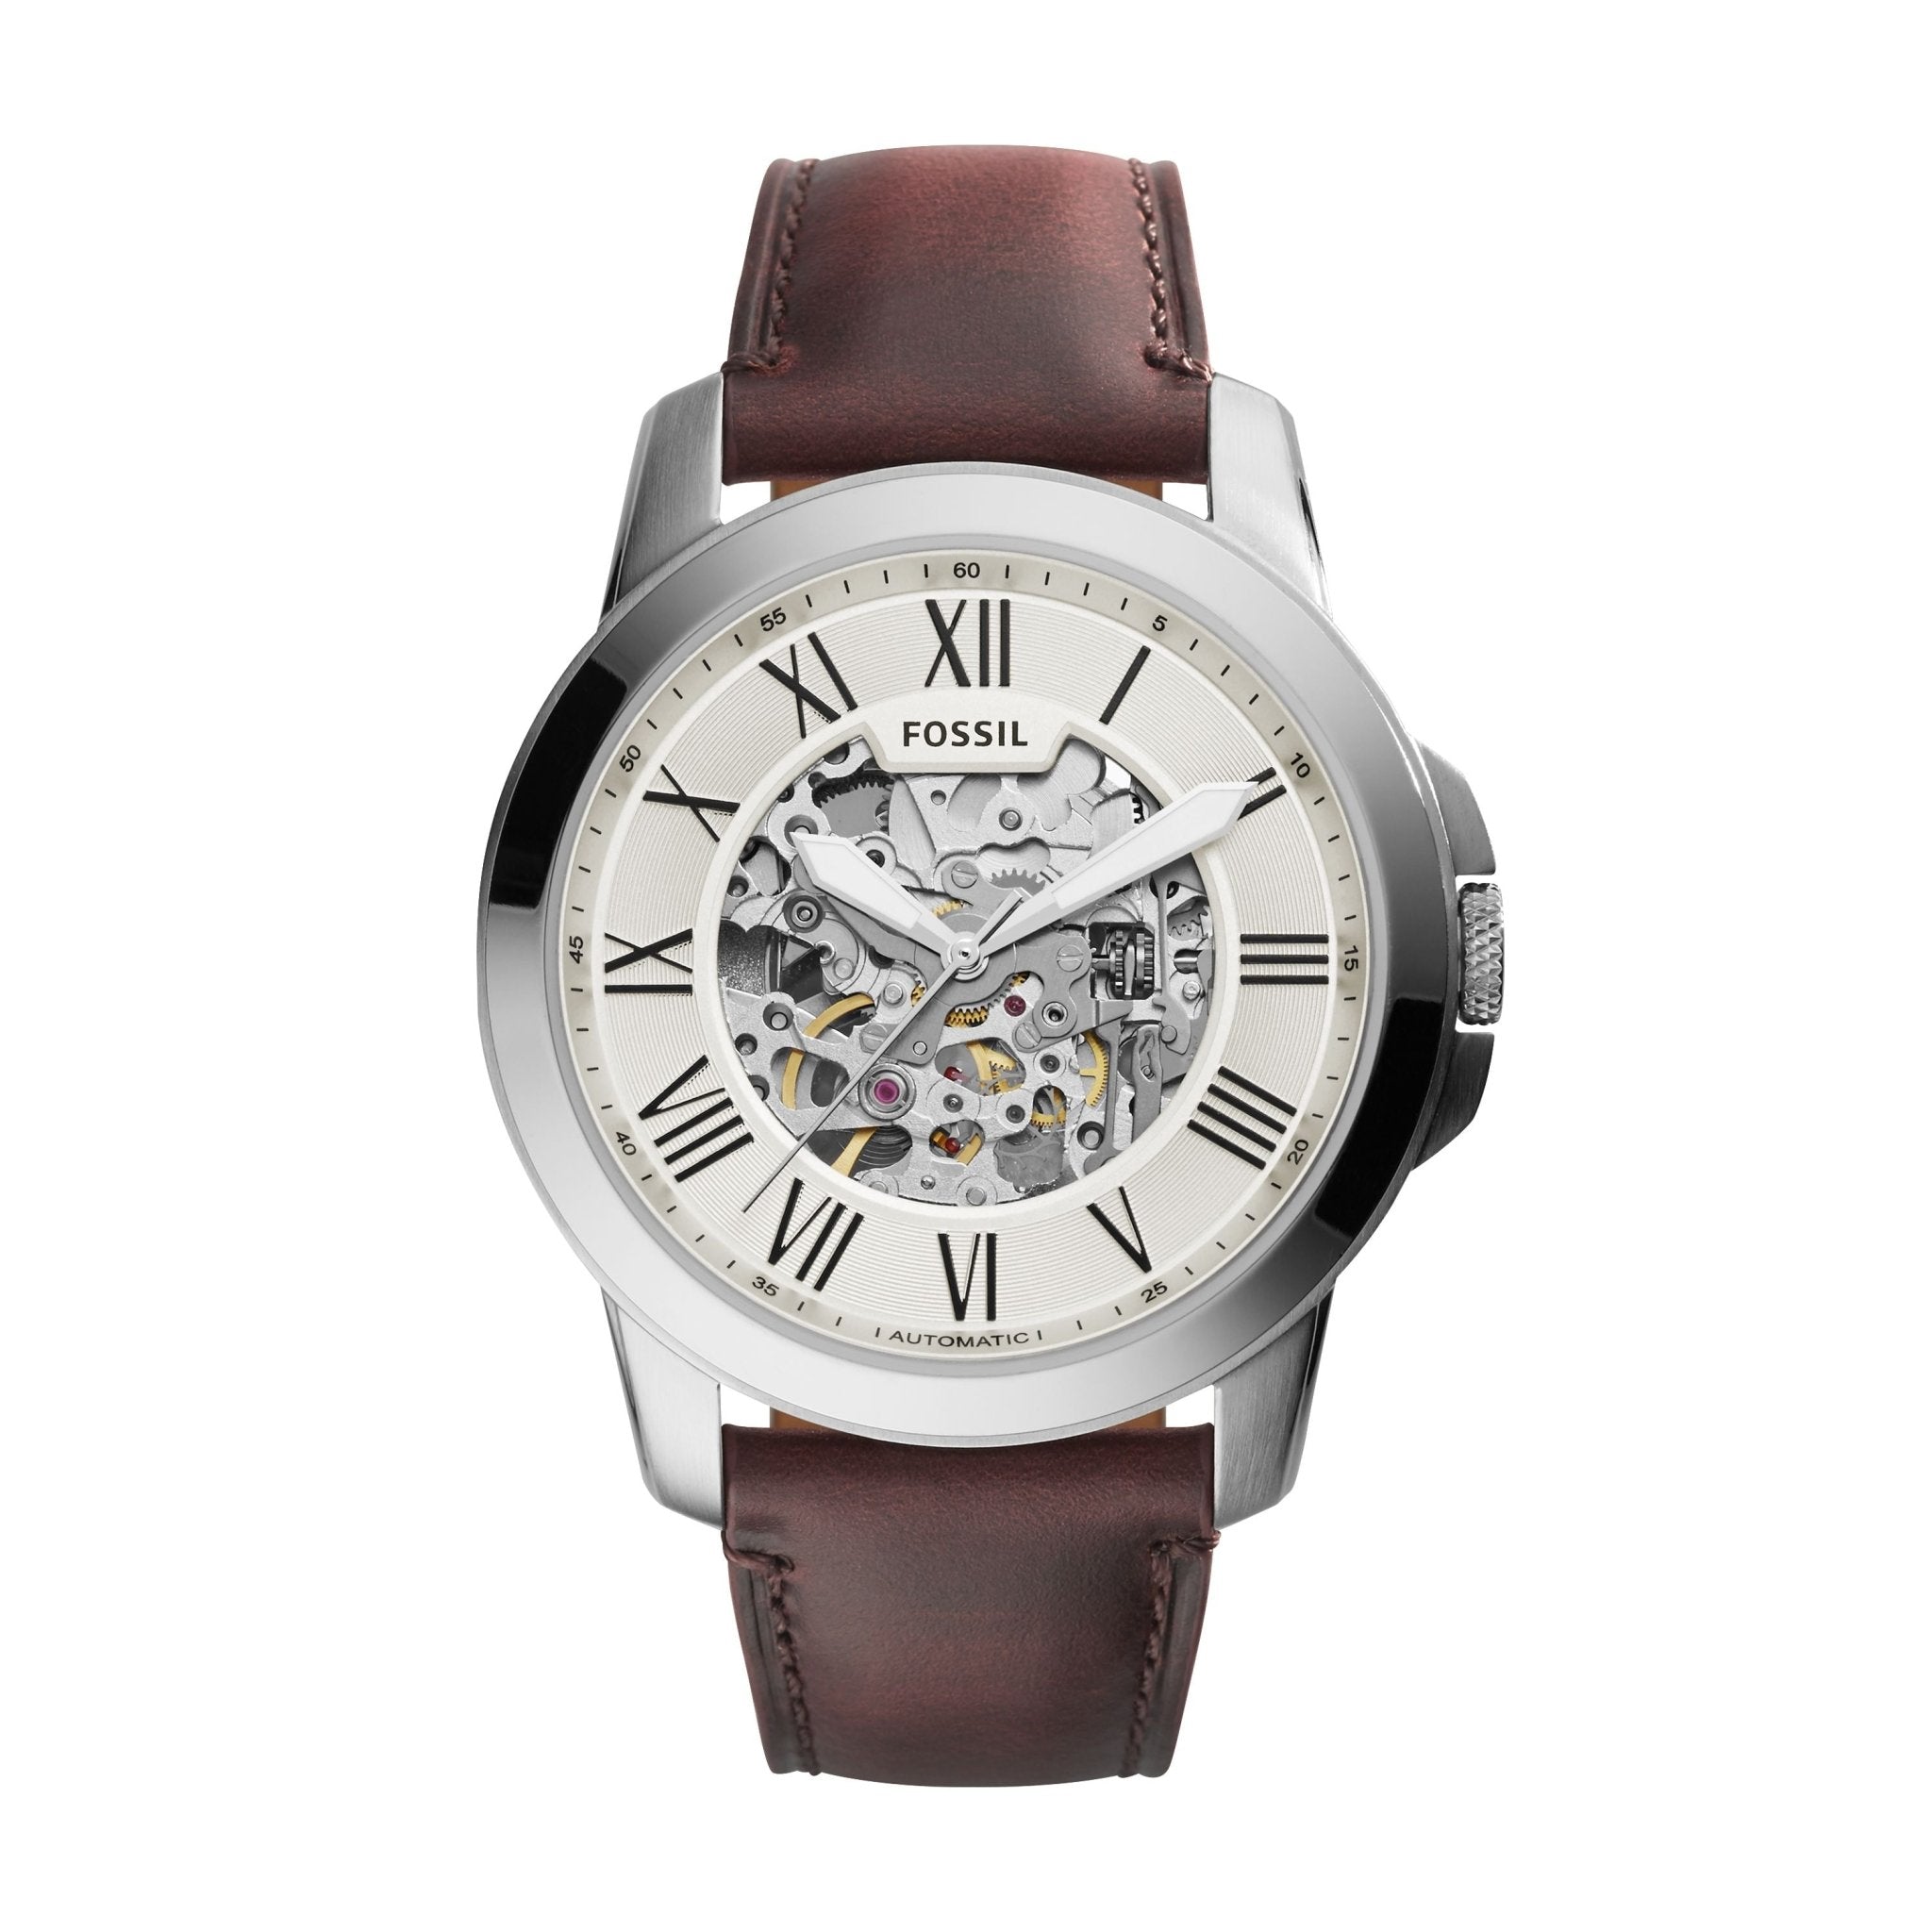 Fossil Men's Grant Chronograph, Two-Tone-Tone Stainless Steel